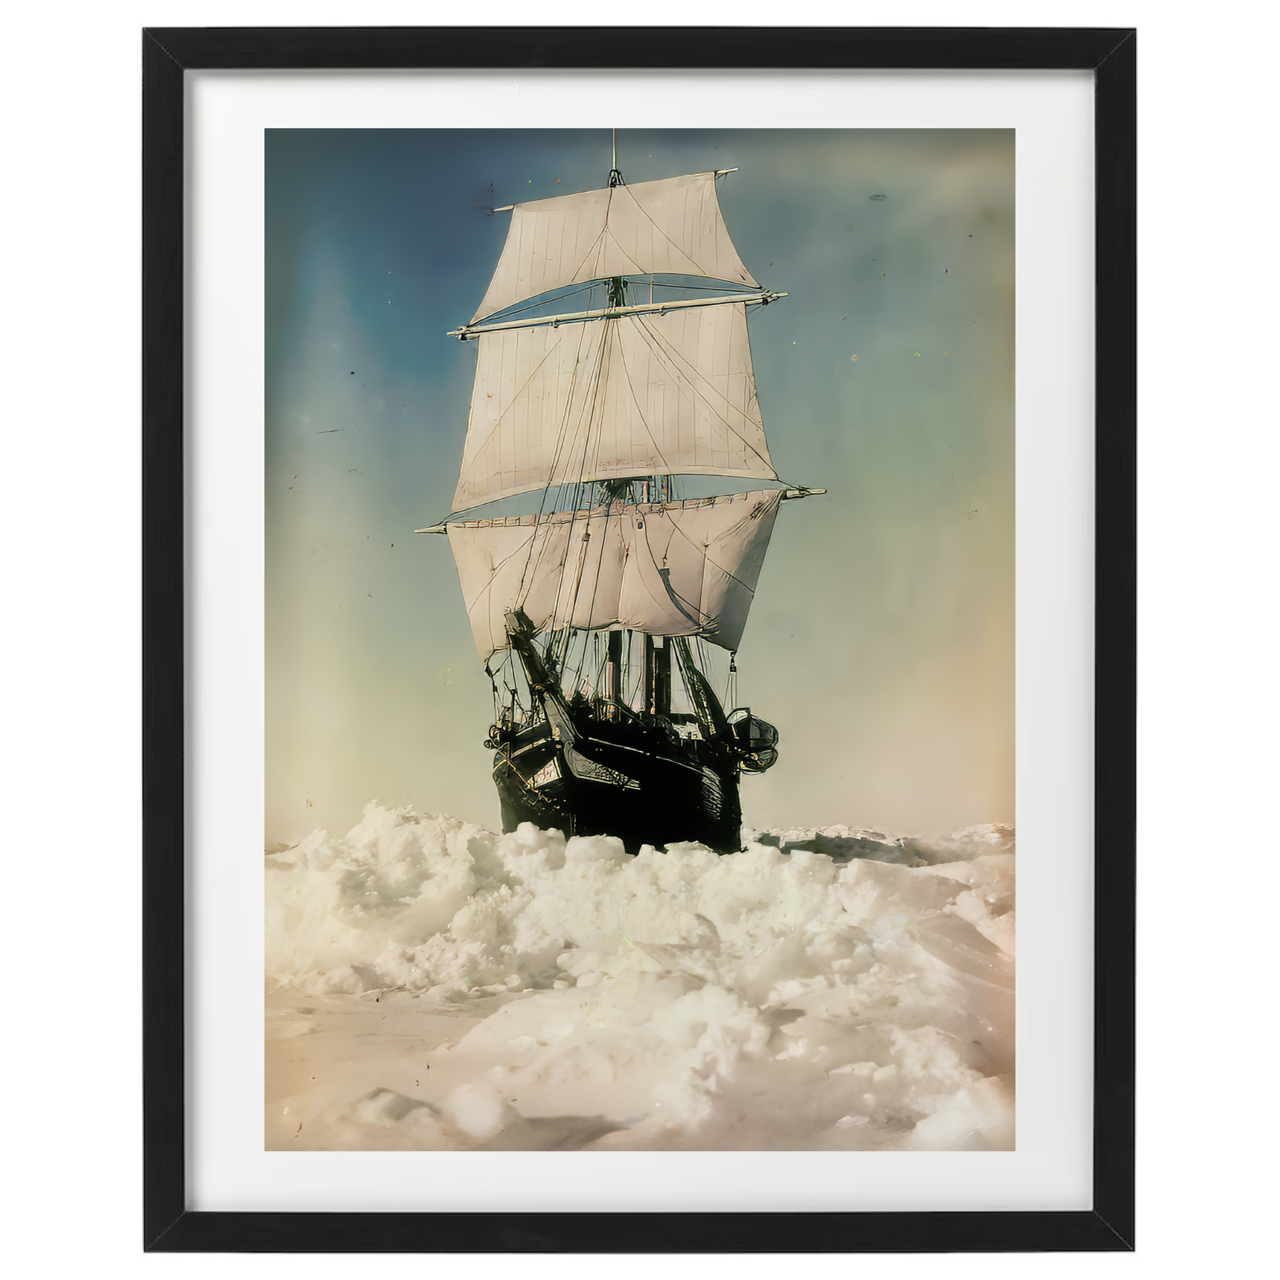 Unveil Number 1 Adventure with the Endurance Ship Art Print: A Tale of Resilience and Beauty